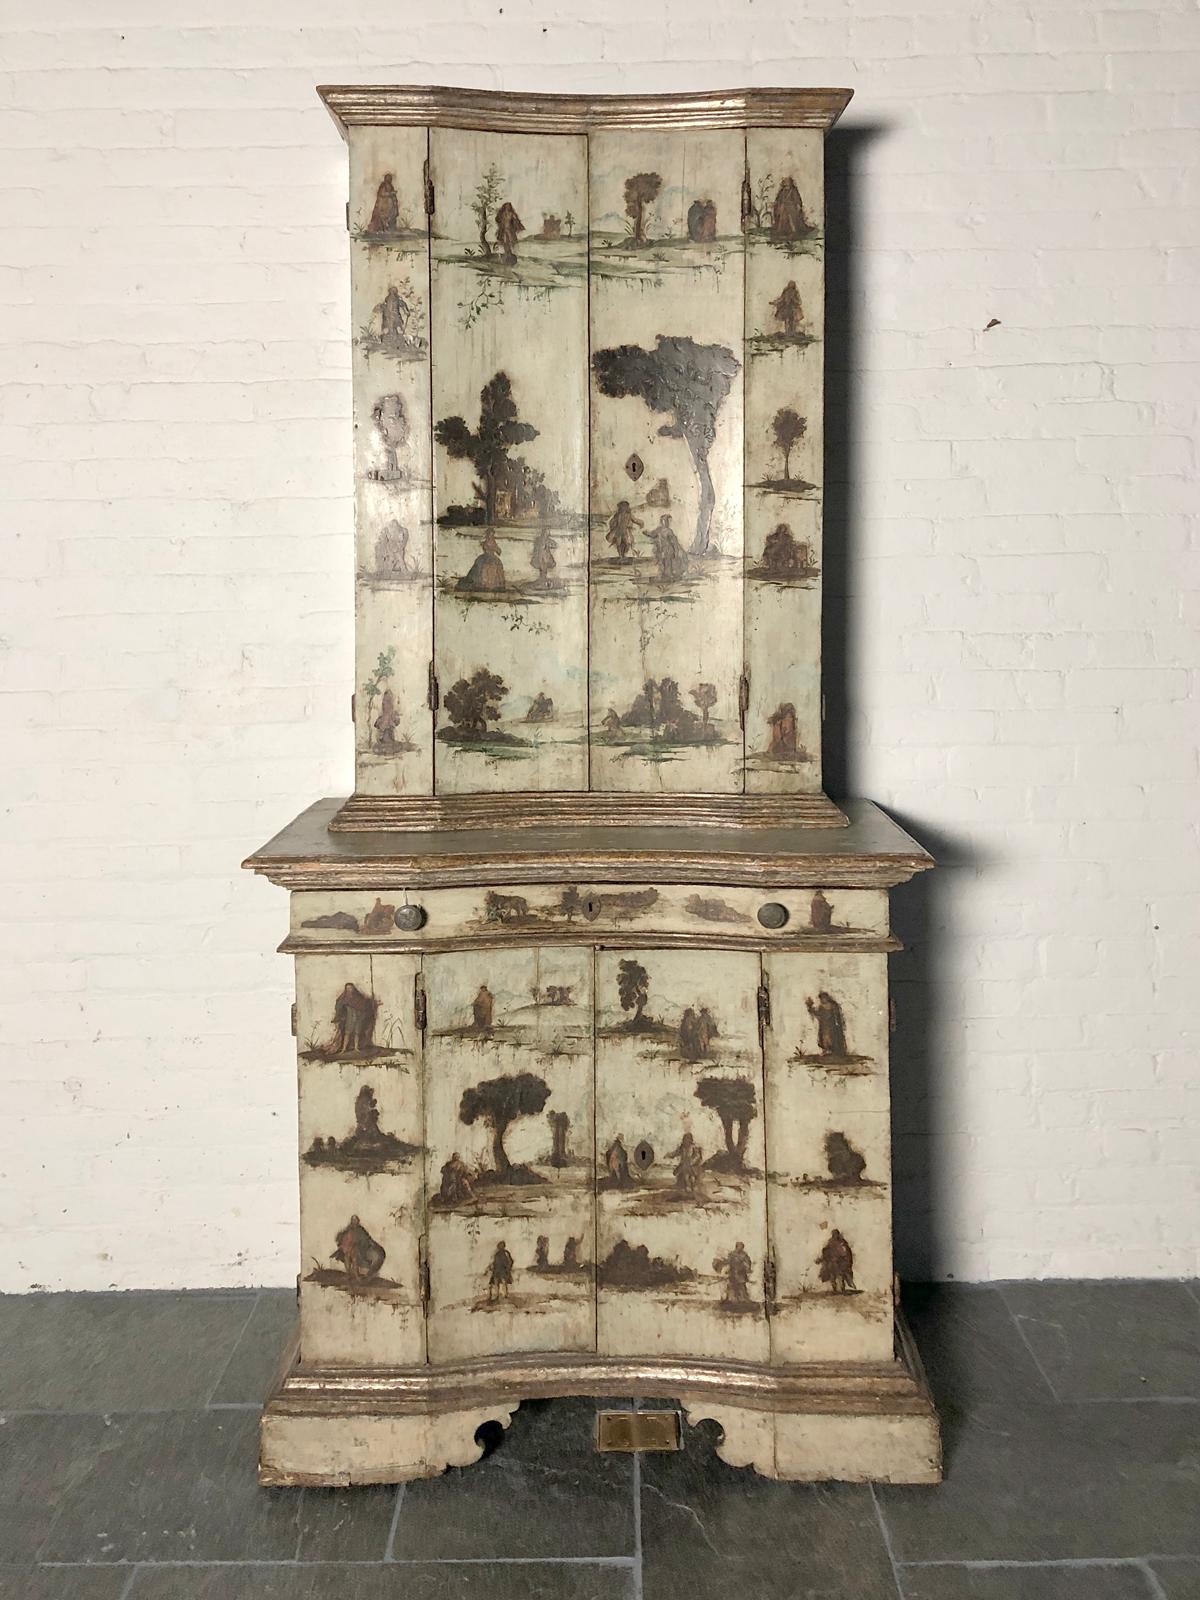 Unusual and rare “Lacca Povera” Cabinet in two parts, Italian, 18th century (ca. 1730), pine / poplar
The upper part with two louvered doors opening to a shelved interior, bottom part with conforming louvered doors revealing a fitted and painted